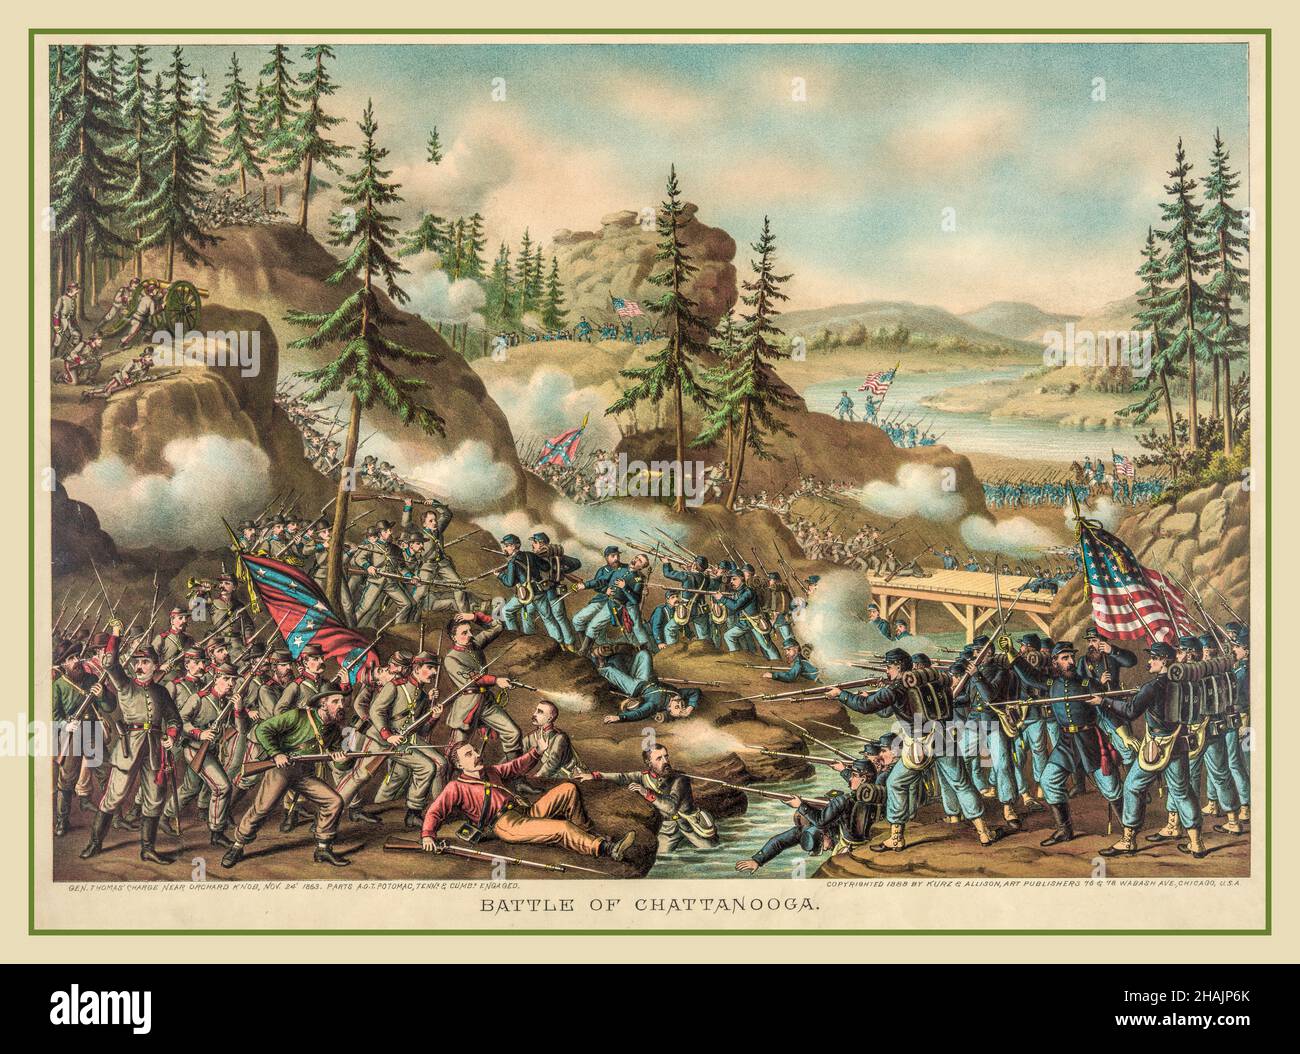 BATTLE OF CHATTANOOGA Vintage 1860's American Civil War colour Illustration Poster 'Battle of Chattanooga'--Gen. Thomas' charge near Orchard Knob, Nov. 24' 1863--parts A.O.T. Potomac, Tenne. & Cumbd. engaged Tennessee USA Stock Photo